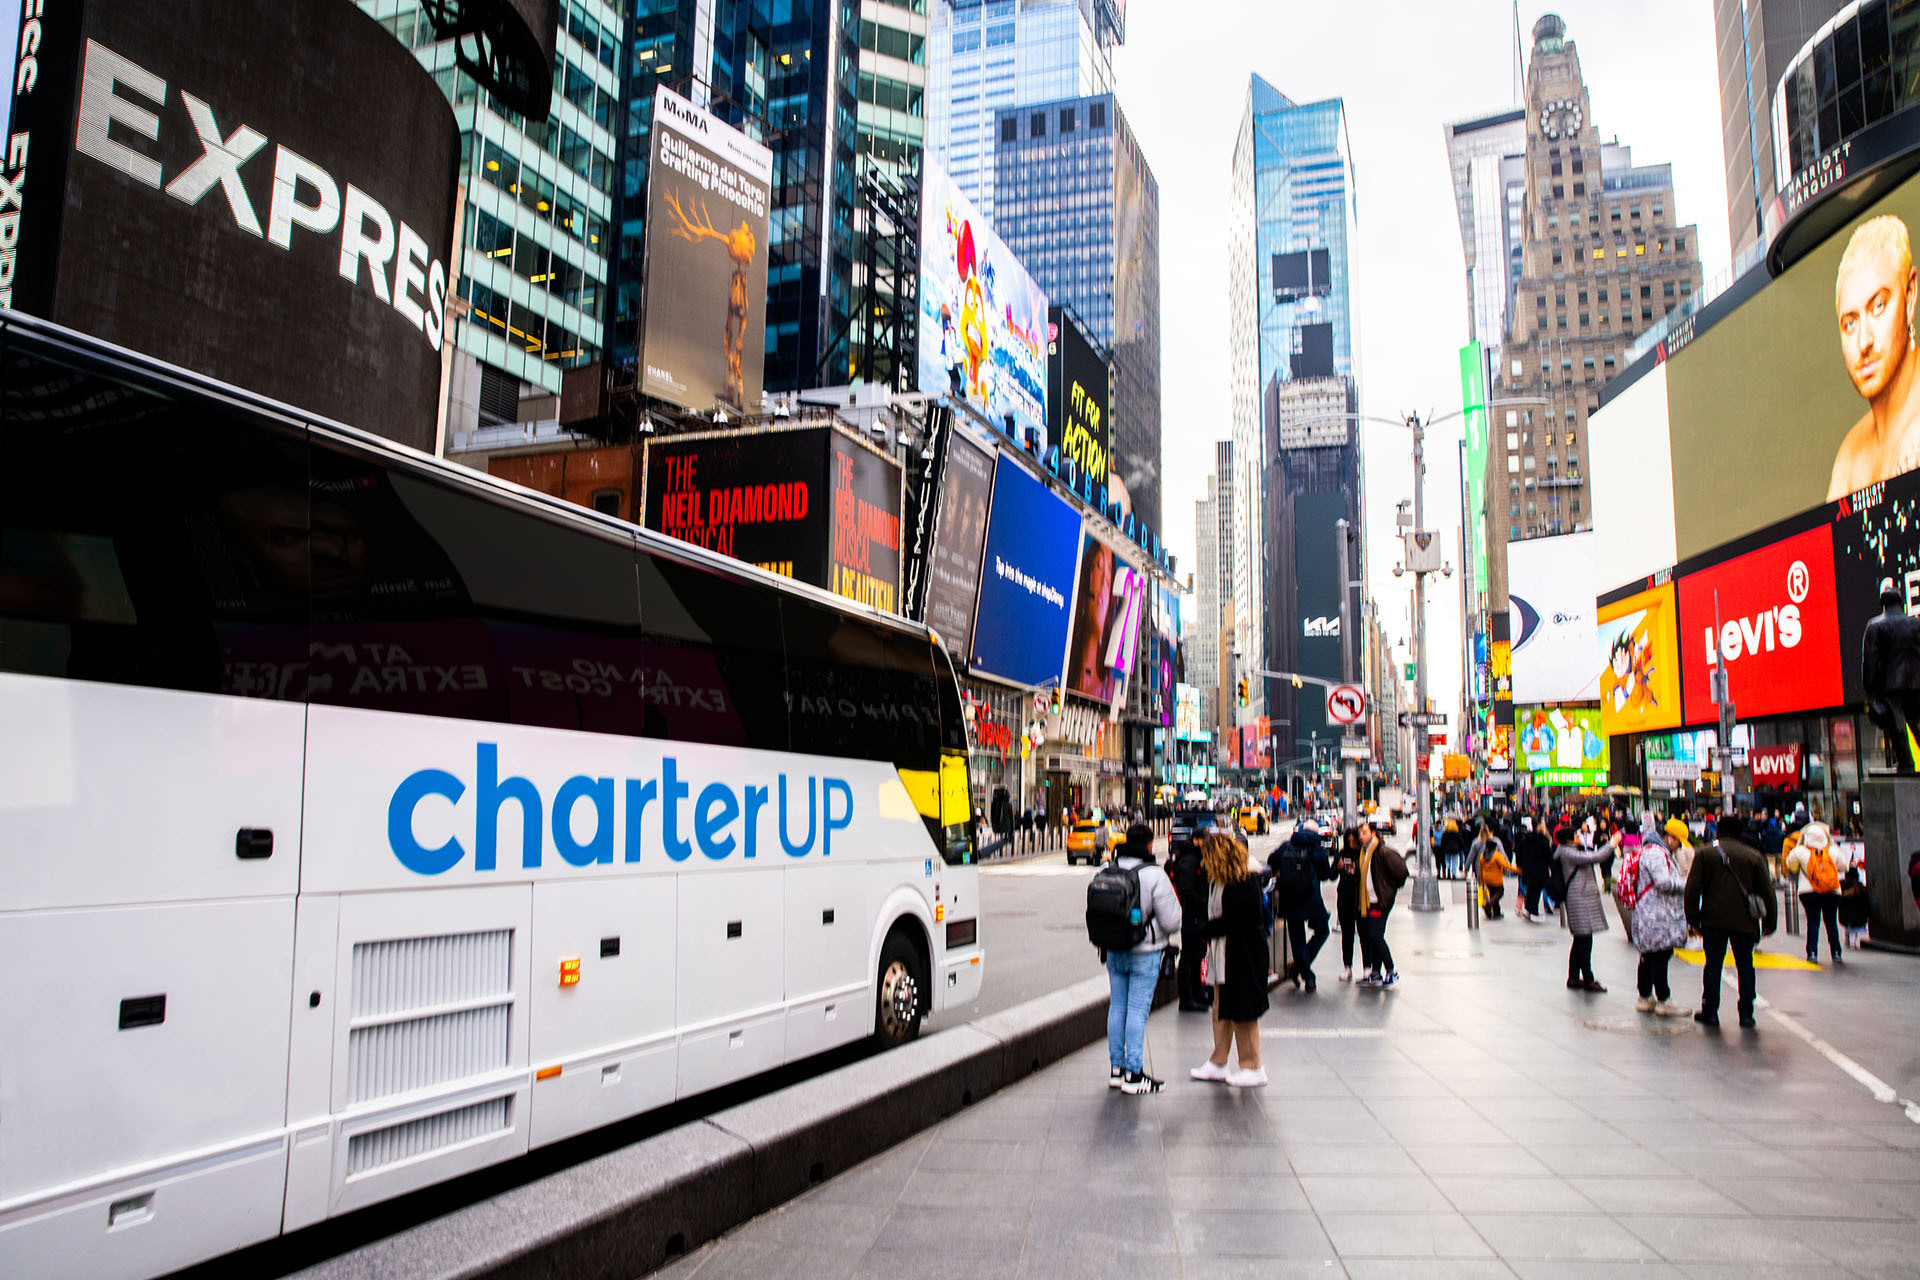 A CharterUP motorcoach travels through Times Square in New York City